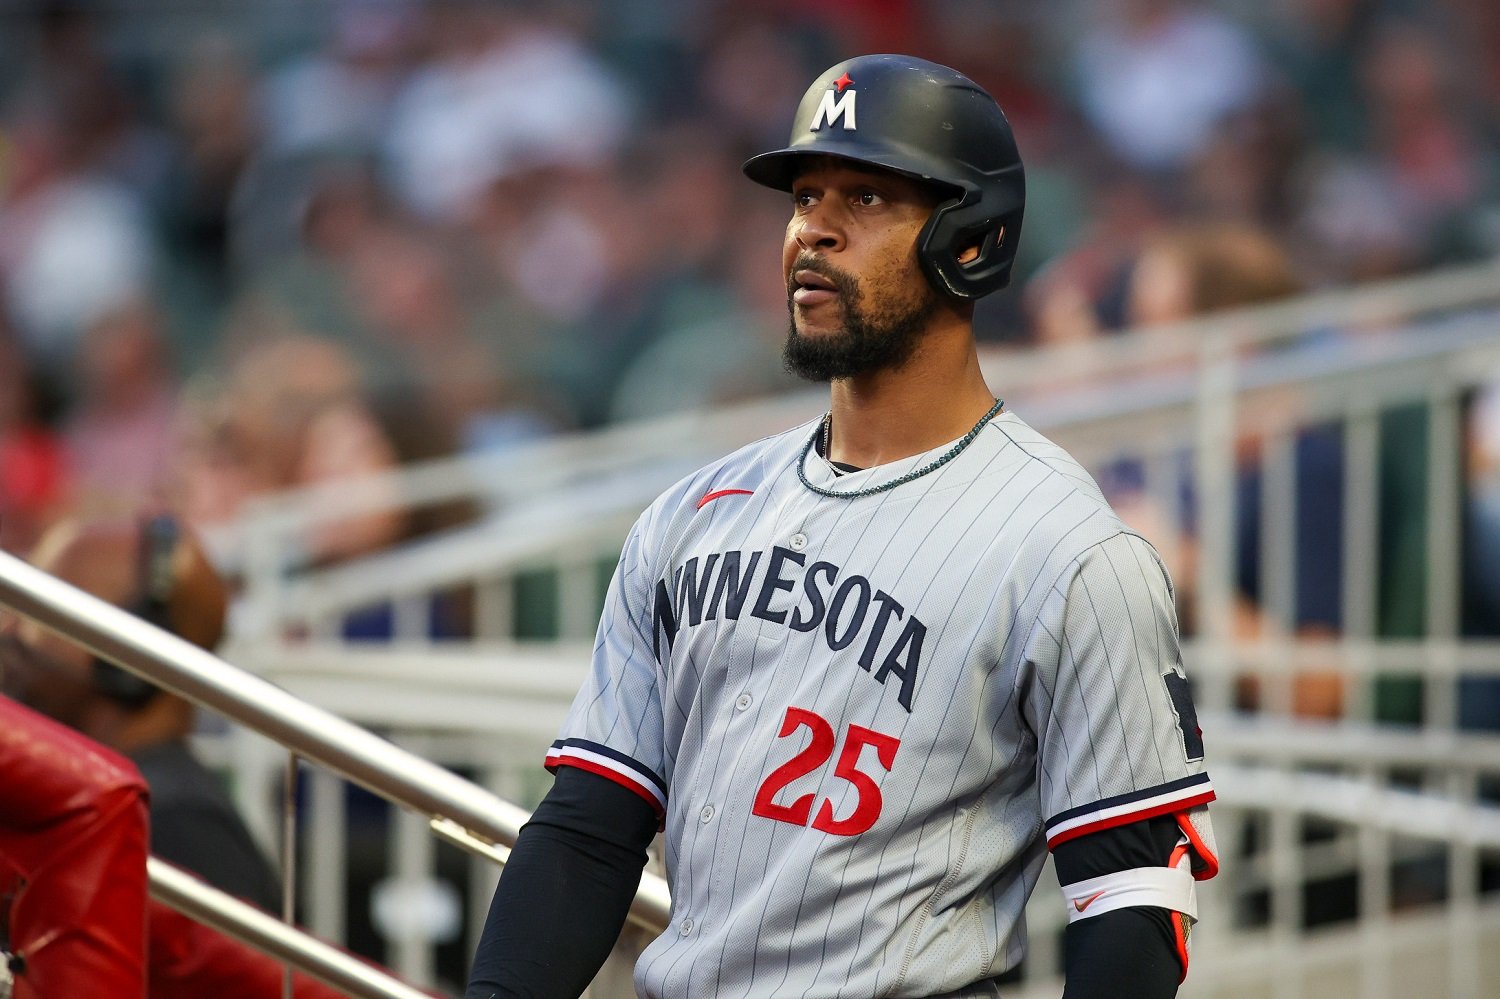 Twins center fielder Byron Buxton says he's healthy and has no